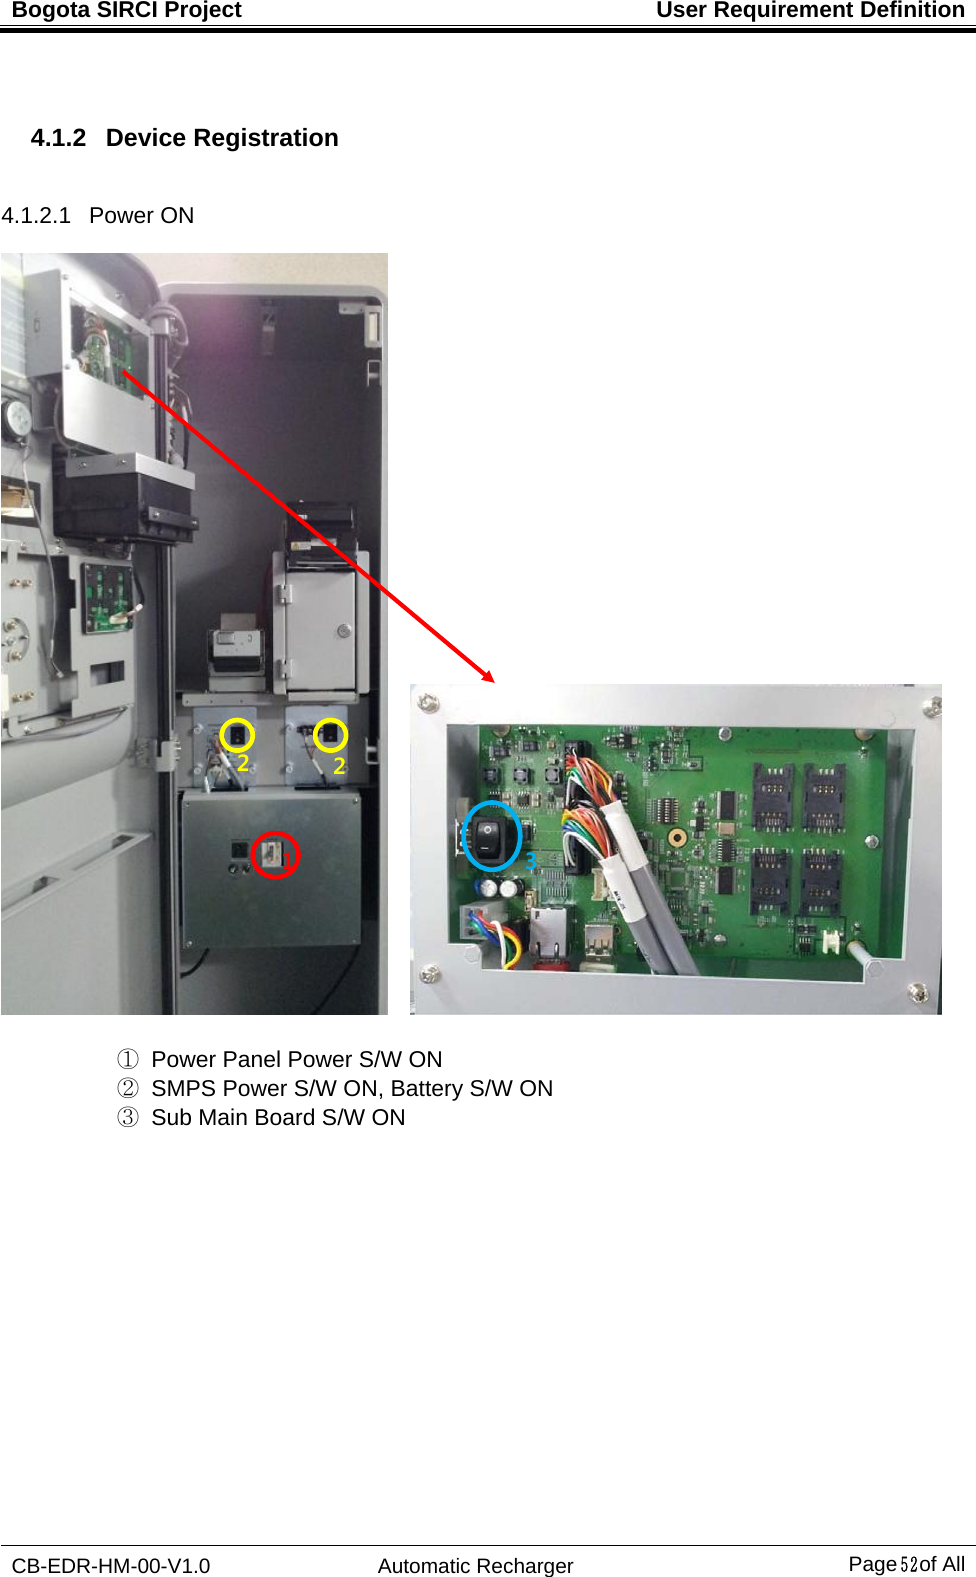 Bogota SIRCI Project  User Requirement Definition CB-EDR-HM-00-V1.0 Automatic Recharger Page５２ of All  4.1.2  Device Registration 4.1.2.1   Power ON      ①  Power Panel Power S/W ON ②  SMPS Power S/W ON, Battery S/W ON ③  Sub Main Board S/W ON  1 2 2 3 